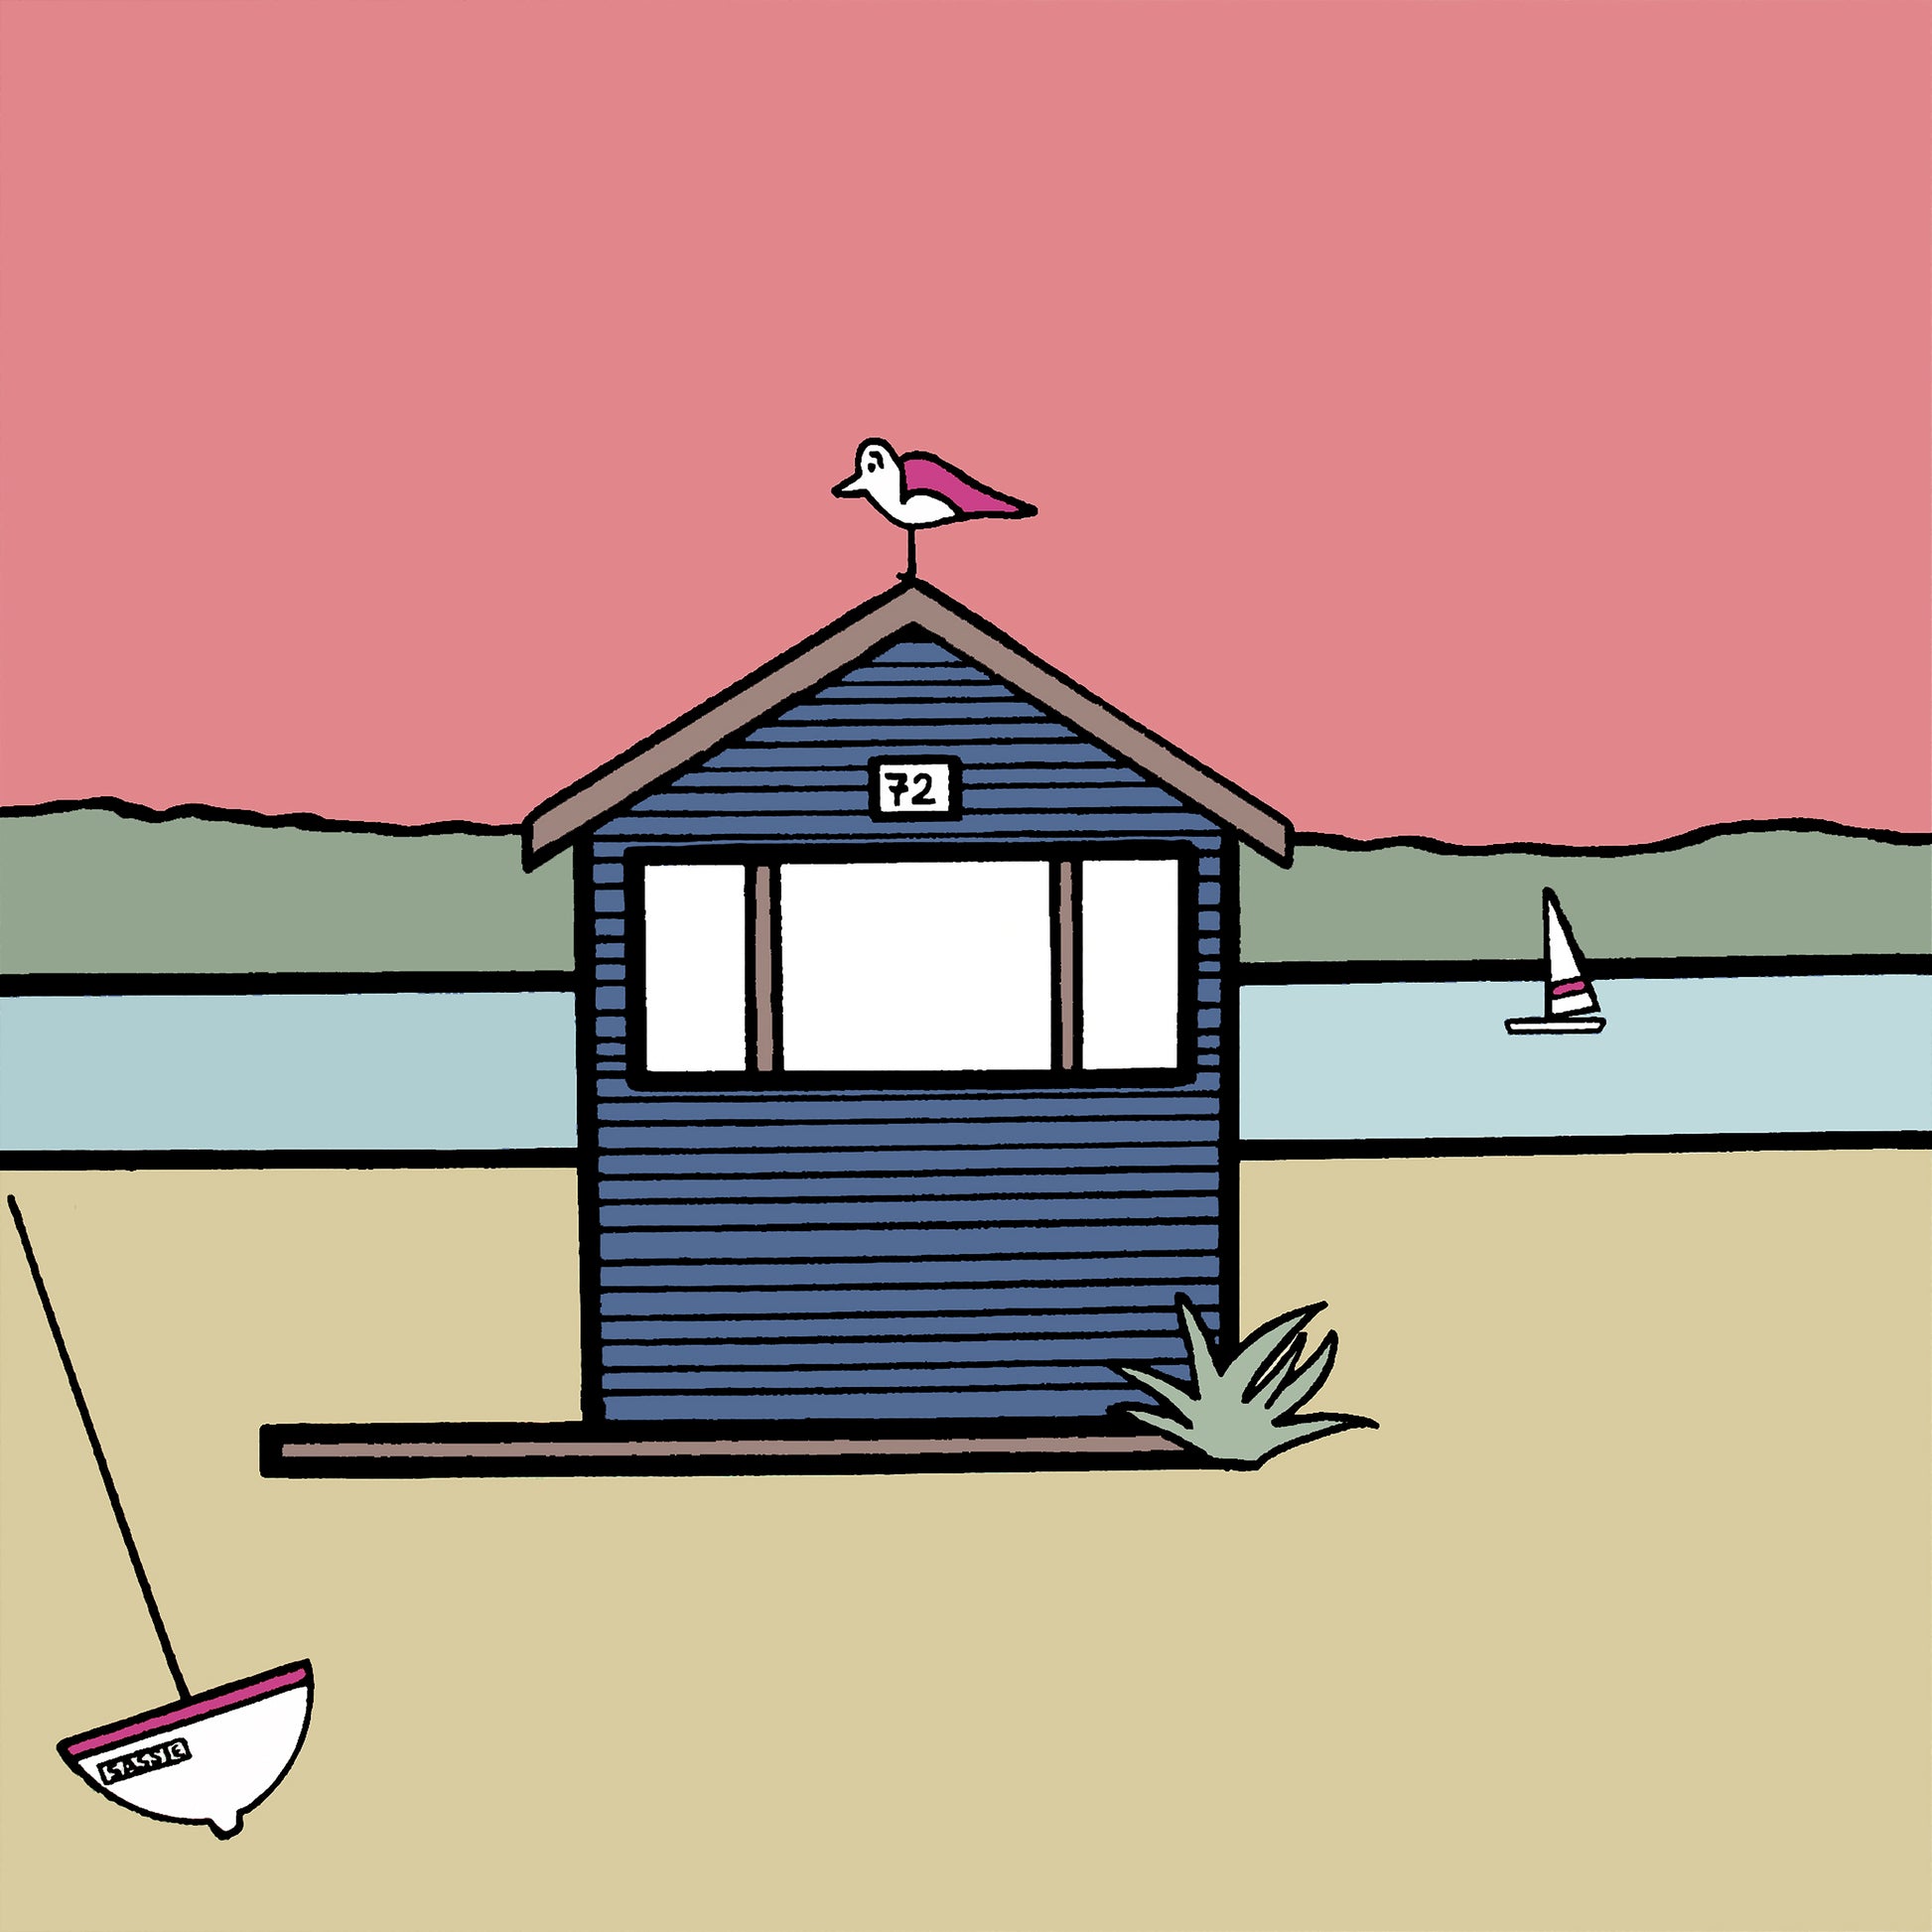 A navy blue beach hut with the number 72 has a pink winged seagull perched on top. The ground is a sandy colour with a small leaning boat. A small plant and wooden deck is at the bottom of the beach hut, with a landscape of the sea in the background, greenery and a warm pink sky. A small sailing boat is in the water. 